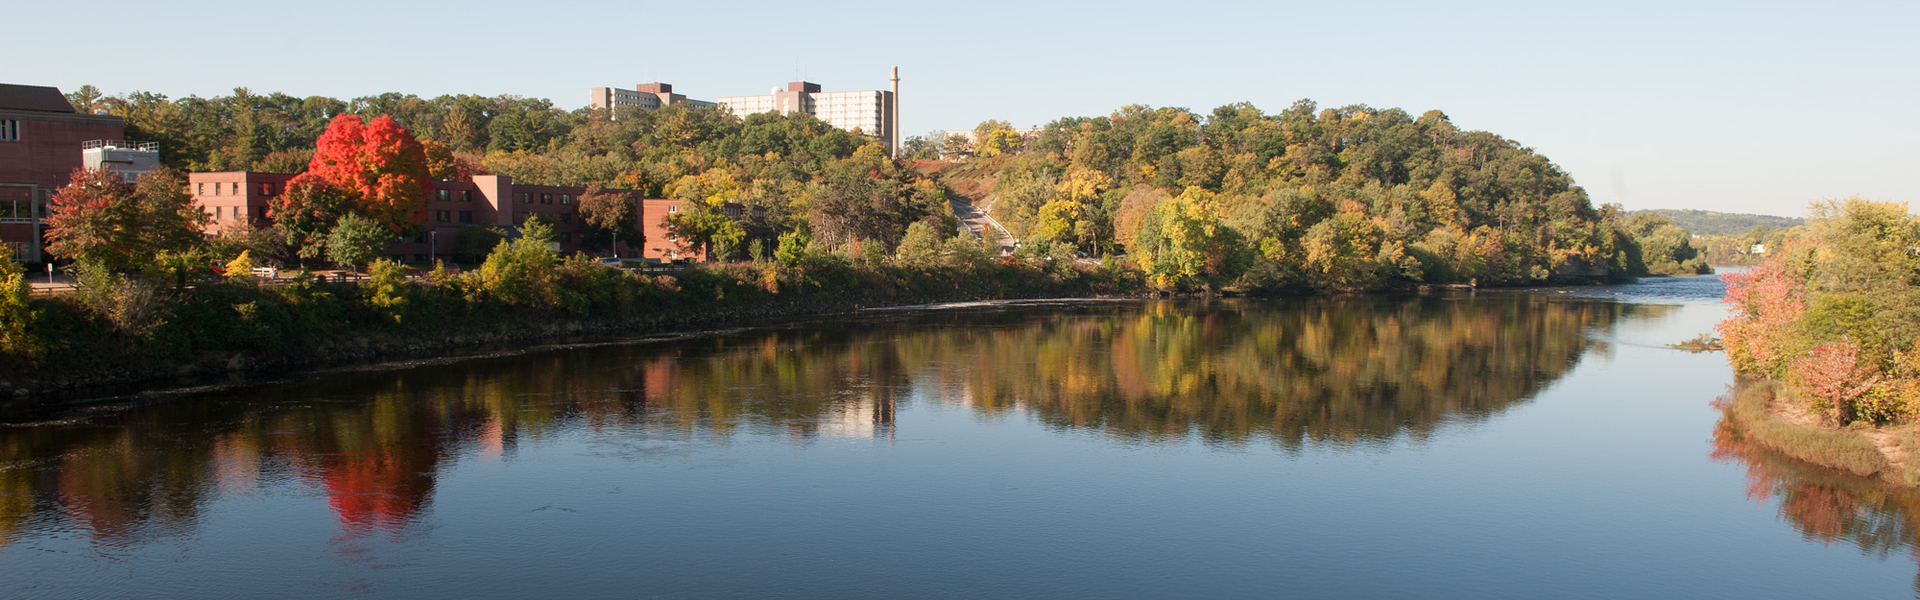 View of the river and campus from the bridge.